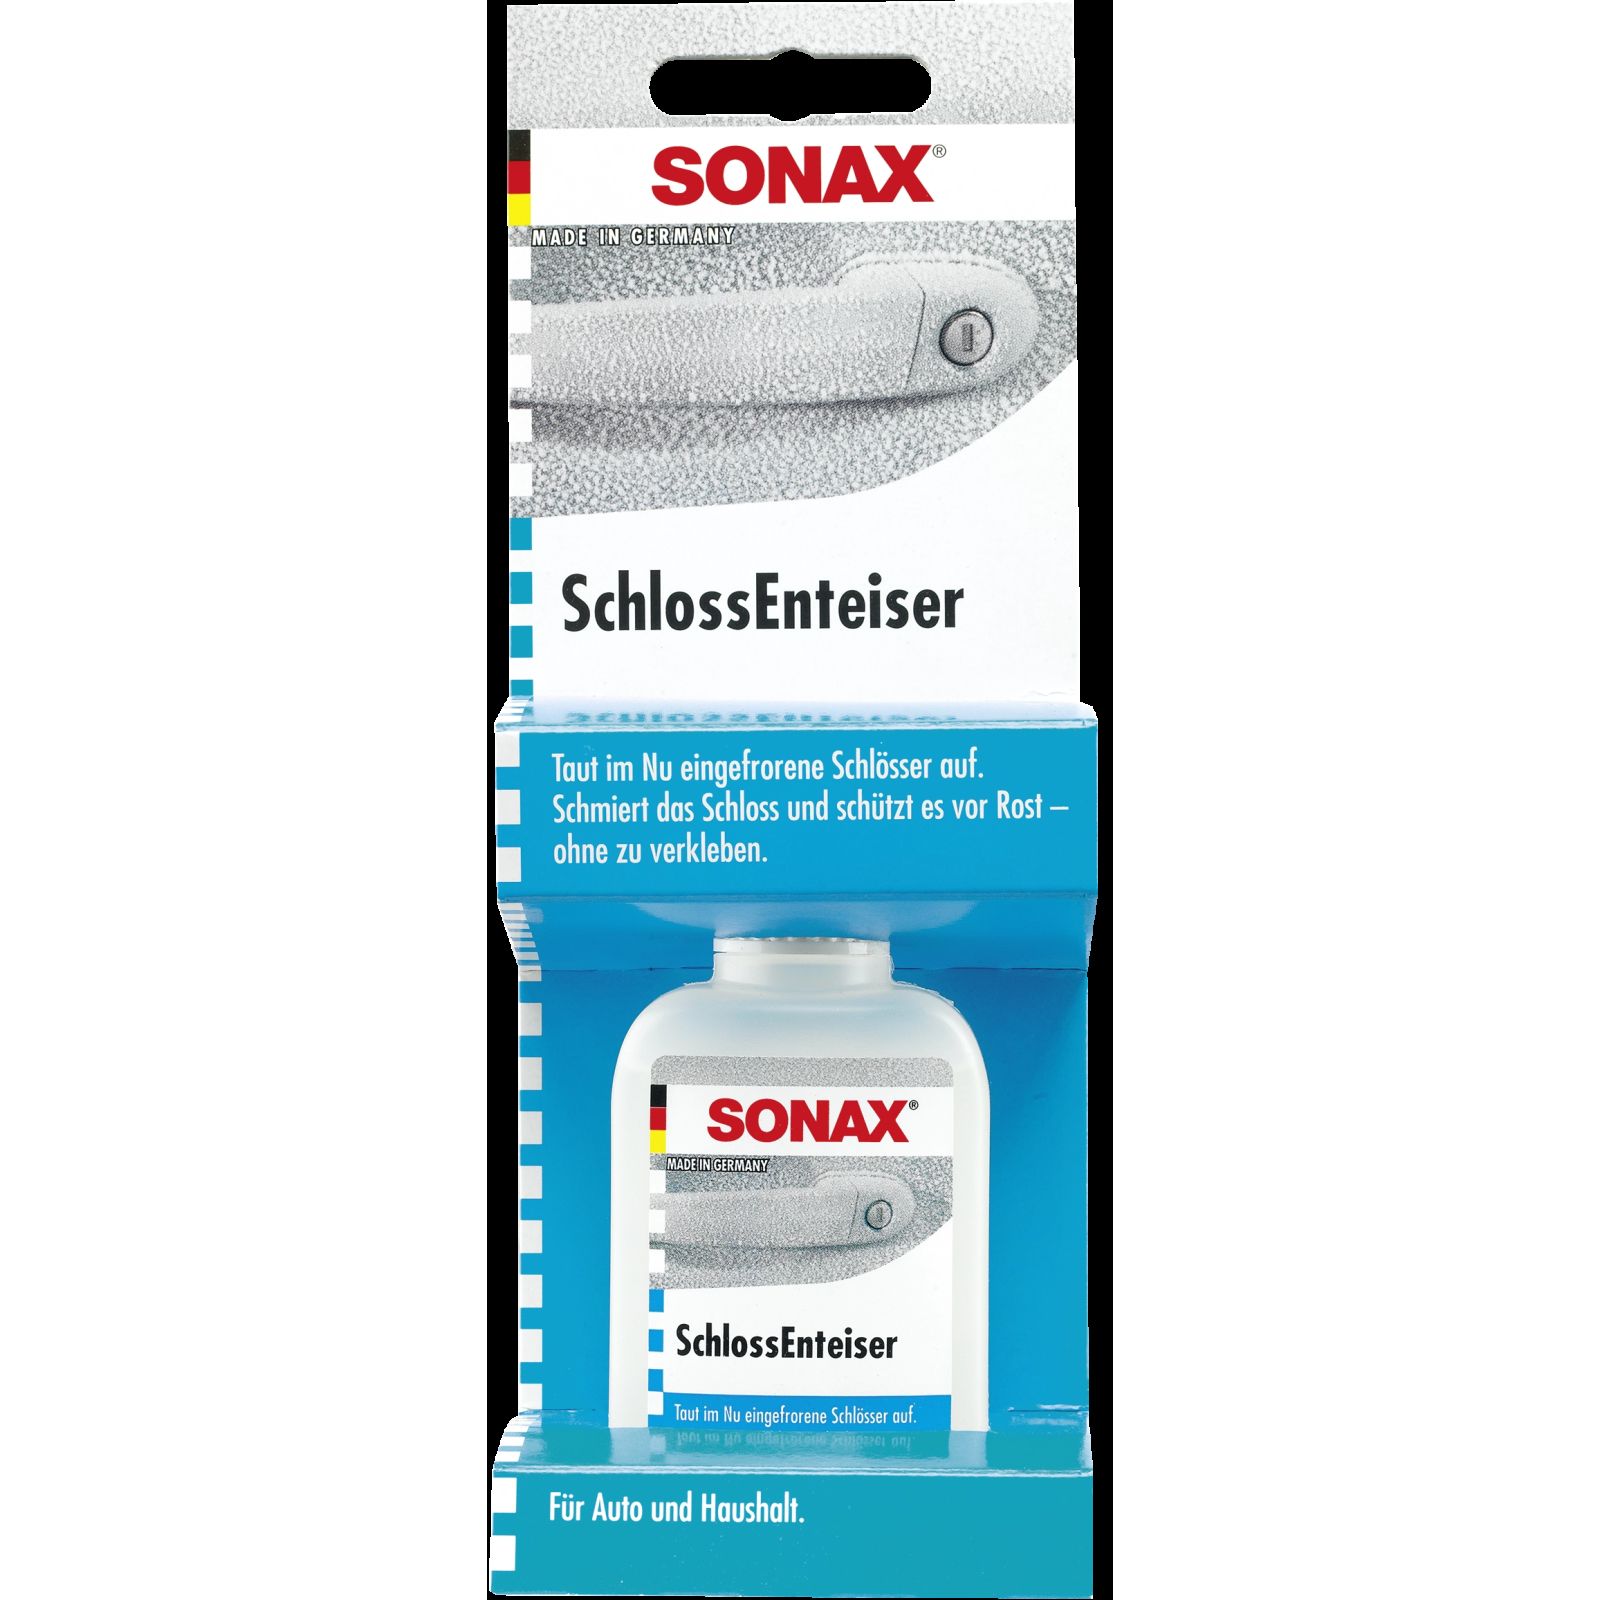 https://www.autoteile-store.at/img/product/sonax-schlossenteiser-50ml-sb-packung-03310000-4476/ec375f43c1bccfc2a66f0bac61ba1200_1600.jpg